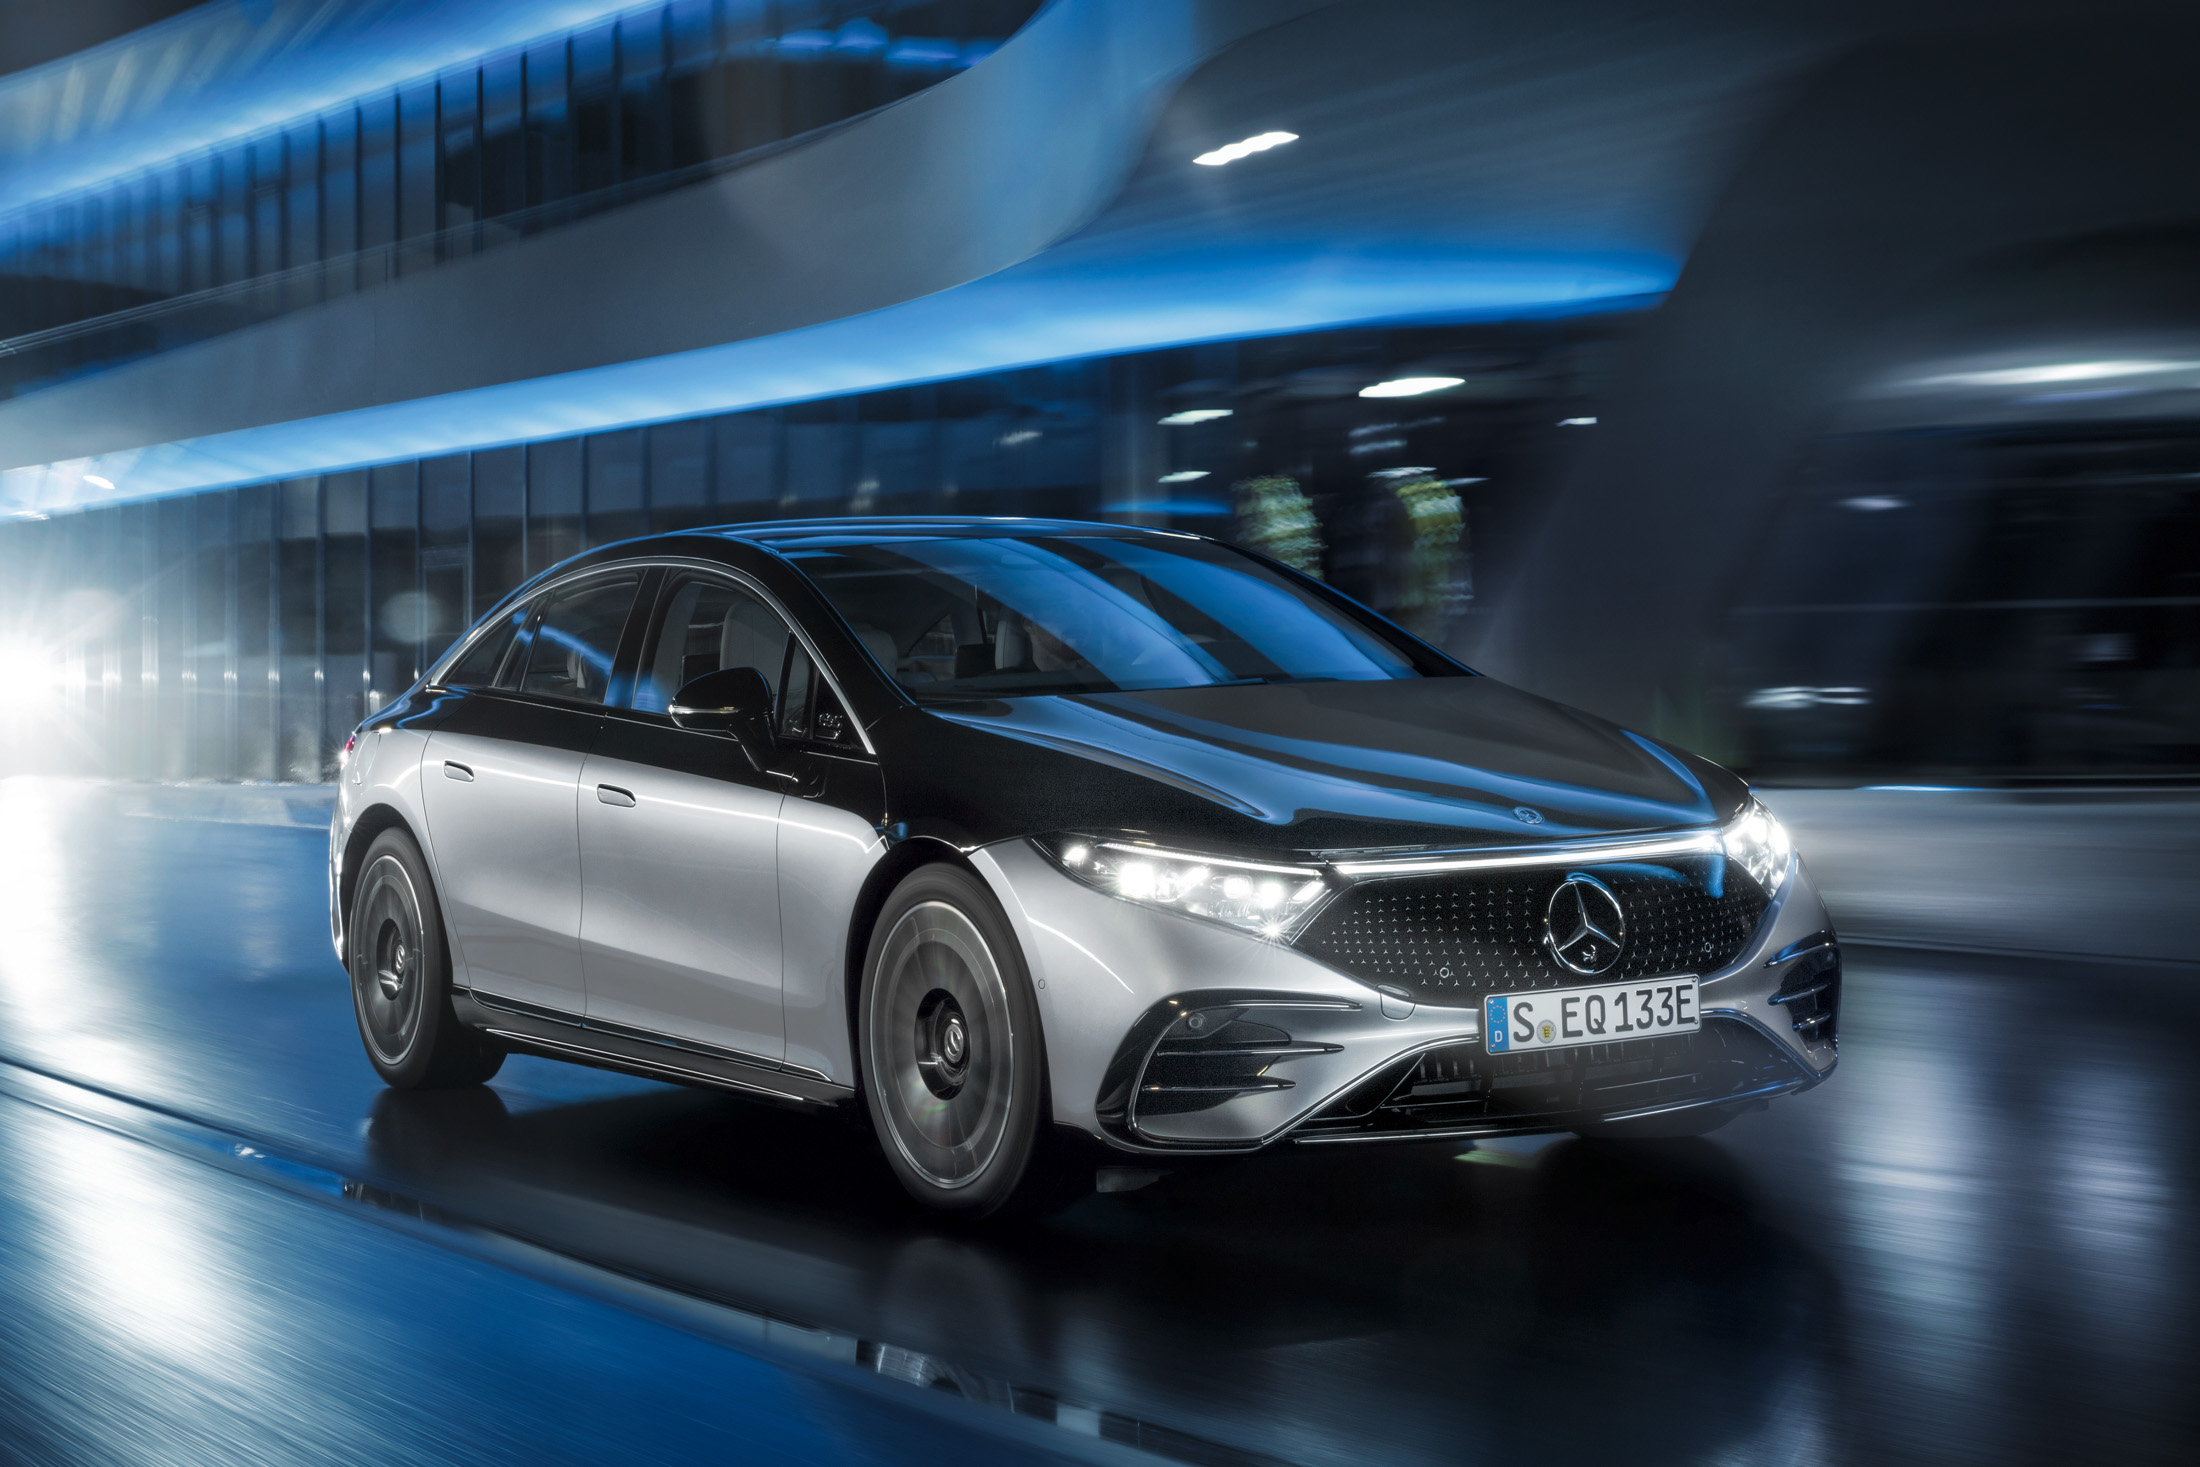 Mercedes-EQ, EQS 580 4MATIC, Exterieur, Farbe: hightechsilber/obsidianschwarz, AMG-Line, Edition 1;( Stromverbrauch kombiniert: 20,0-16,9 kWh/100 km; CO2-Emissionen kombiniert: 0 g/km) // Mercedes-EQ, EQS 580 4MATIC, Exterior, colour: high-tech silver/obsidian black, AMG-Line, Edition 1; (combined electrical consumption: 20.0-16.9 kWh/100 km; combined CO2 emissions: 0 g/km)